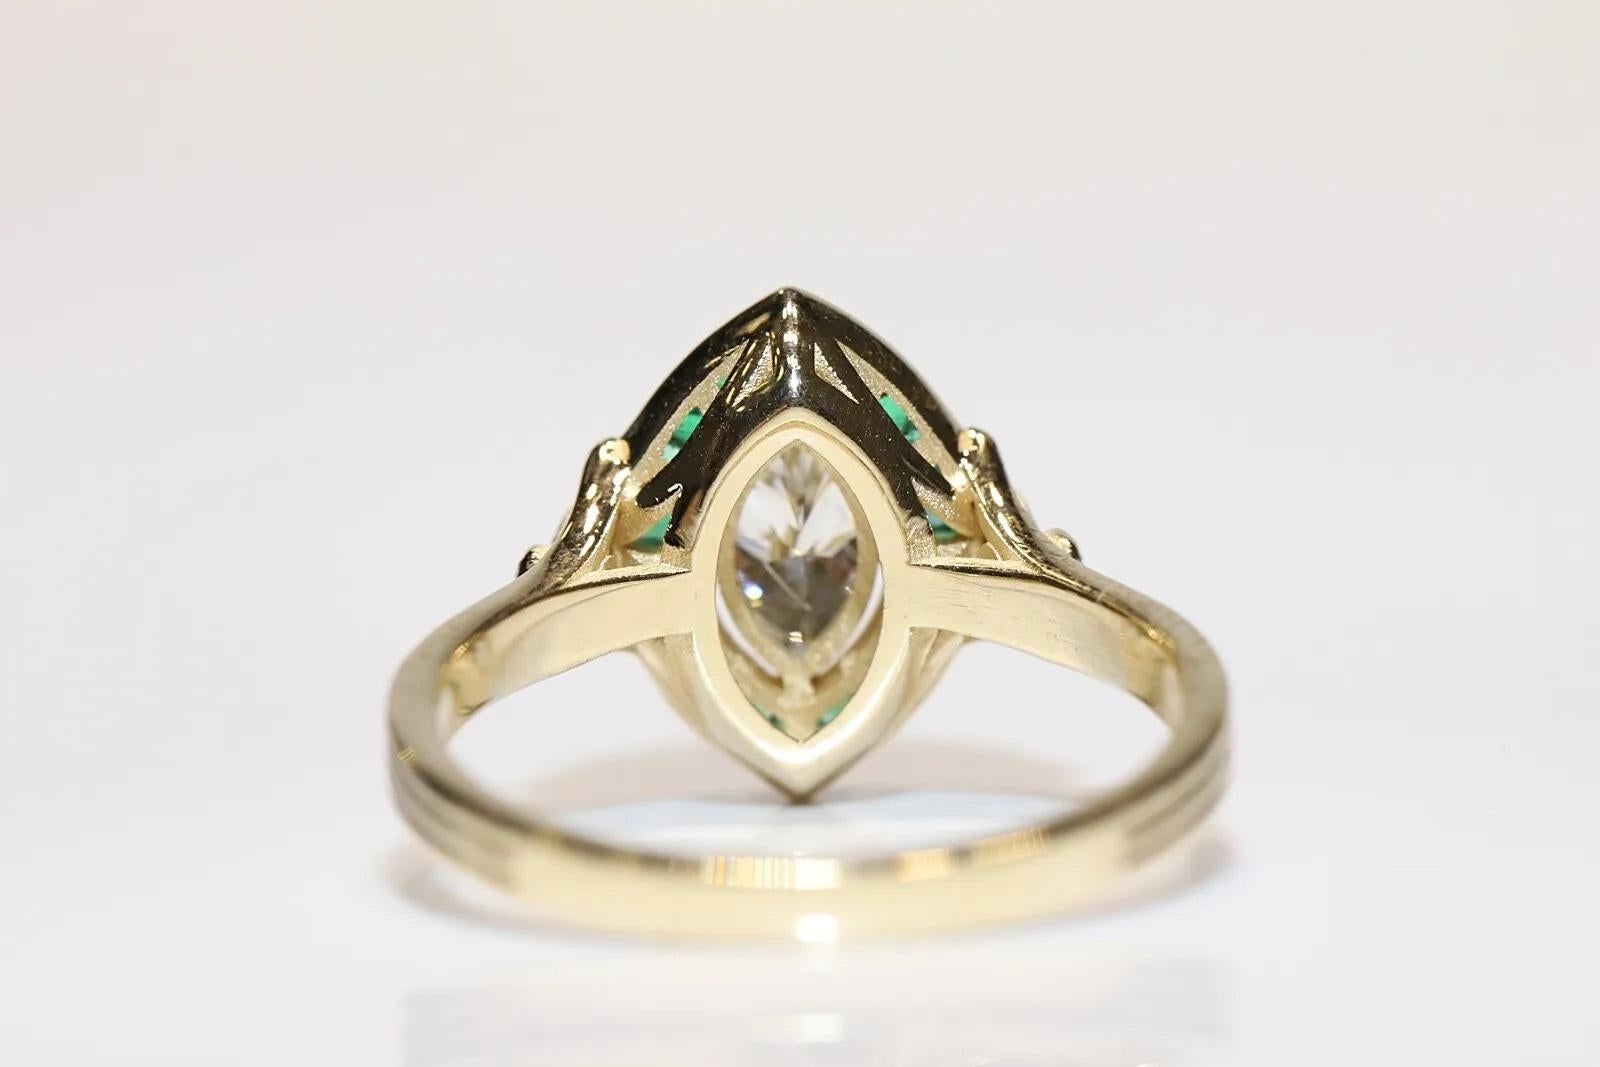 New Made 14k Gold Natural Marquise Cut Diamond And Caliber Emerald Ring For Sale 2